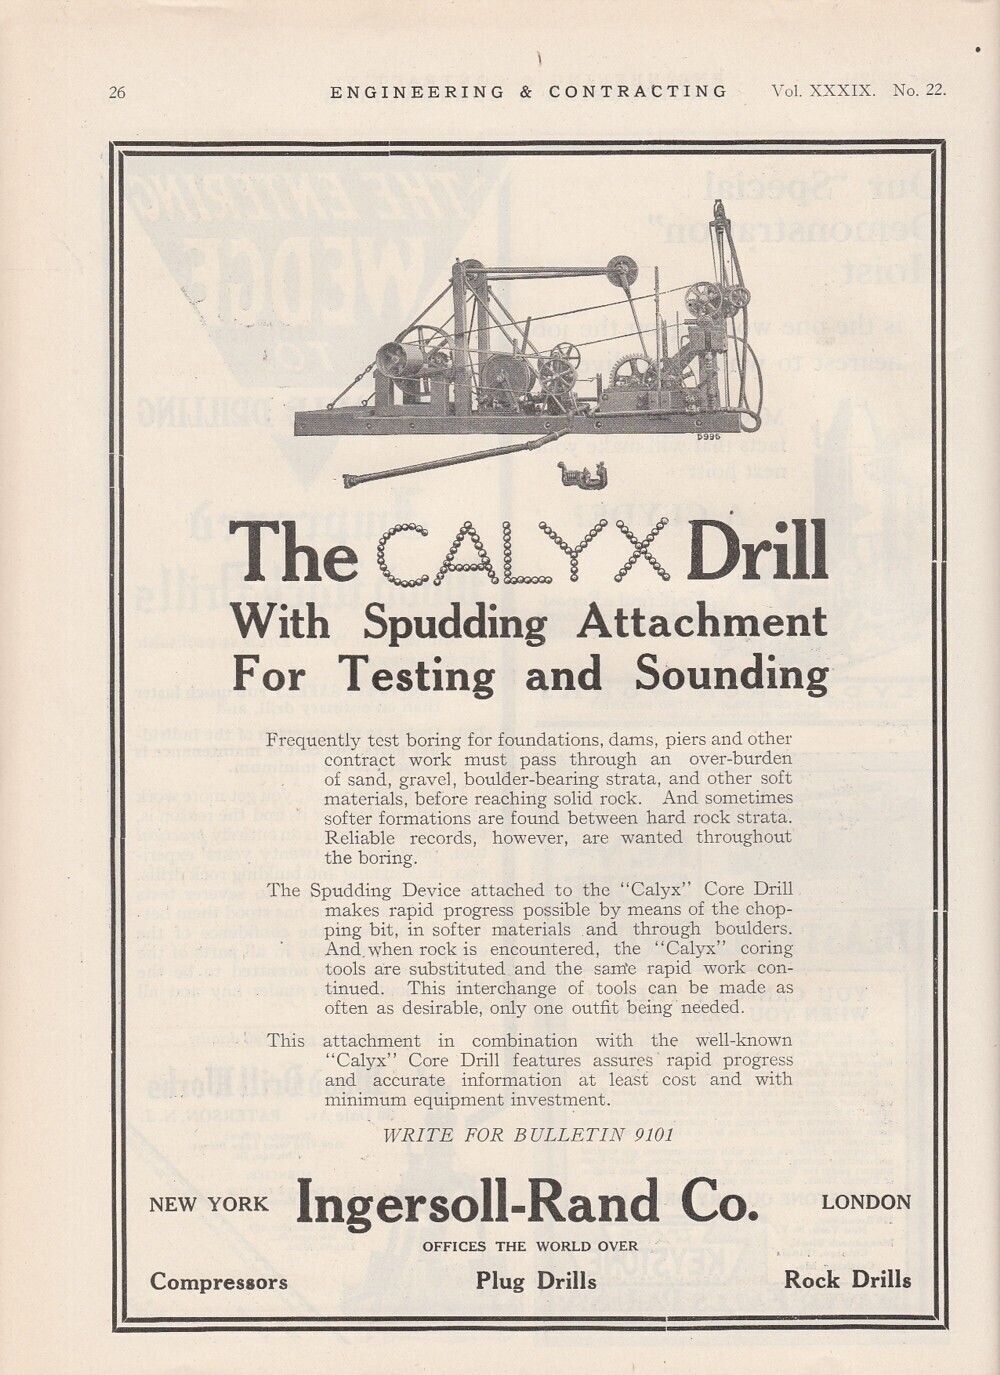 1913 Ingersoll-Rand Co New York NY Ad: Calyx Drill with Spudding Attachment